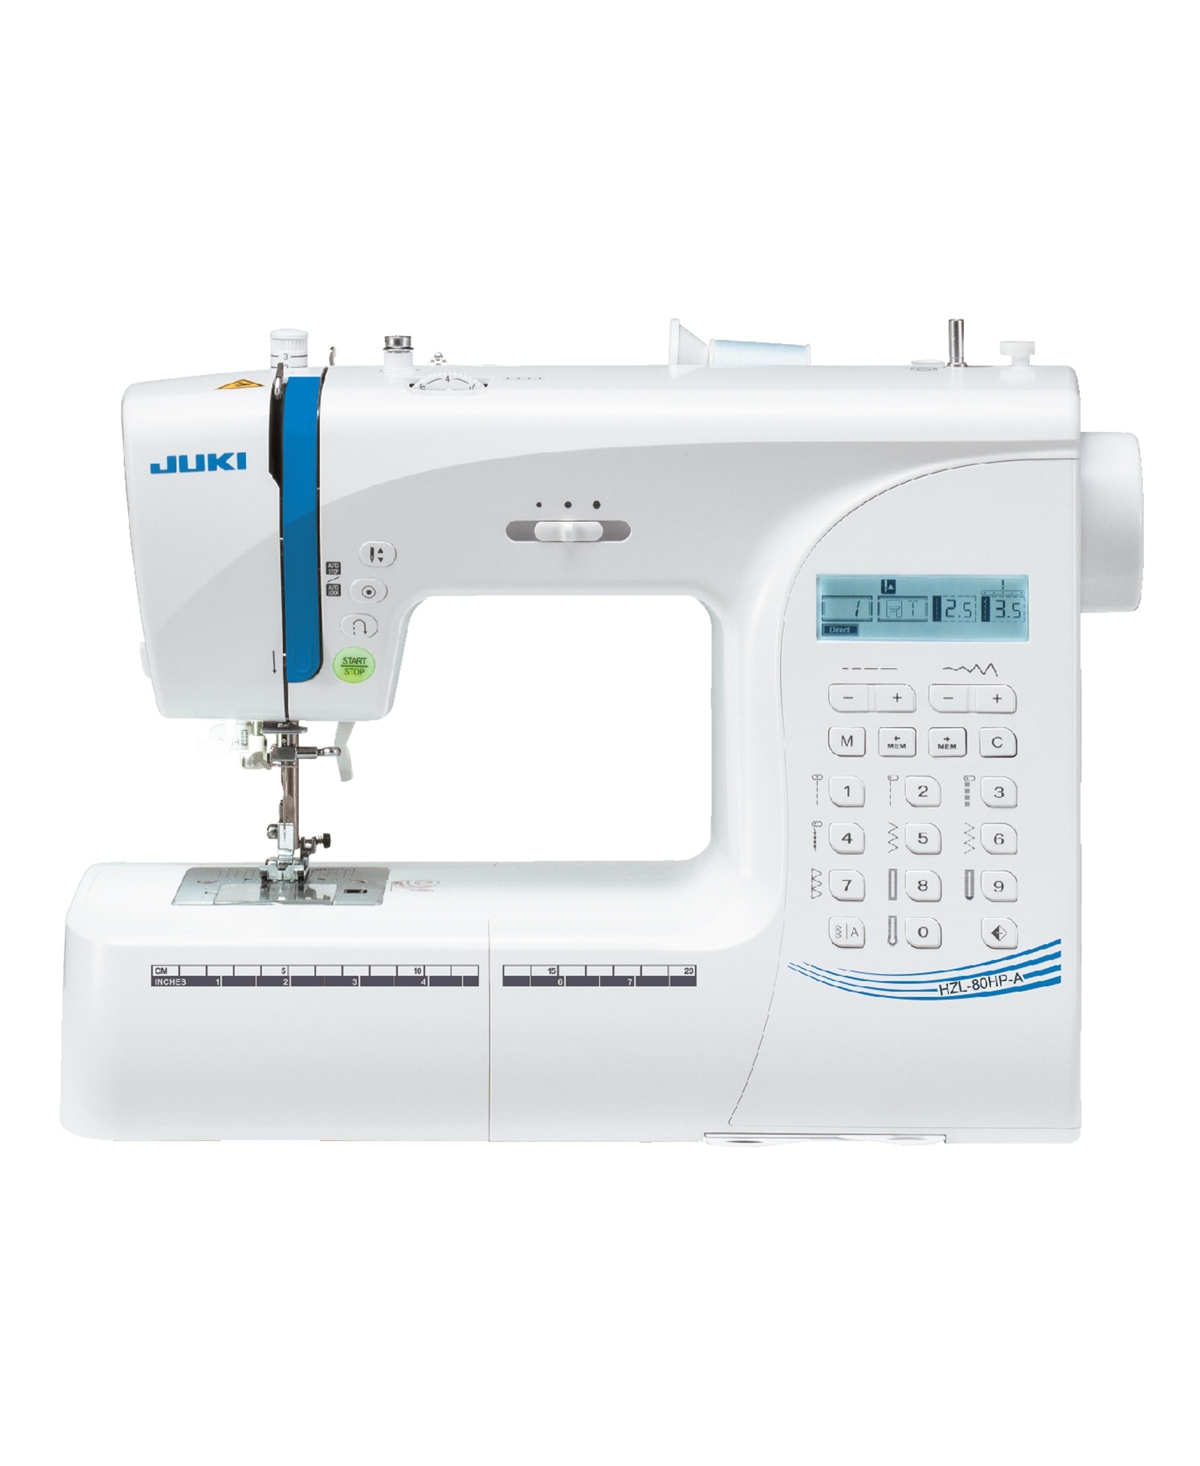 Hzl-80HP Computerized Sewing Machine - White